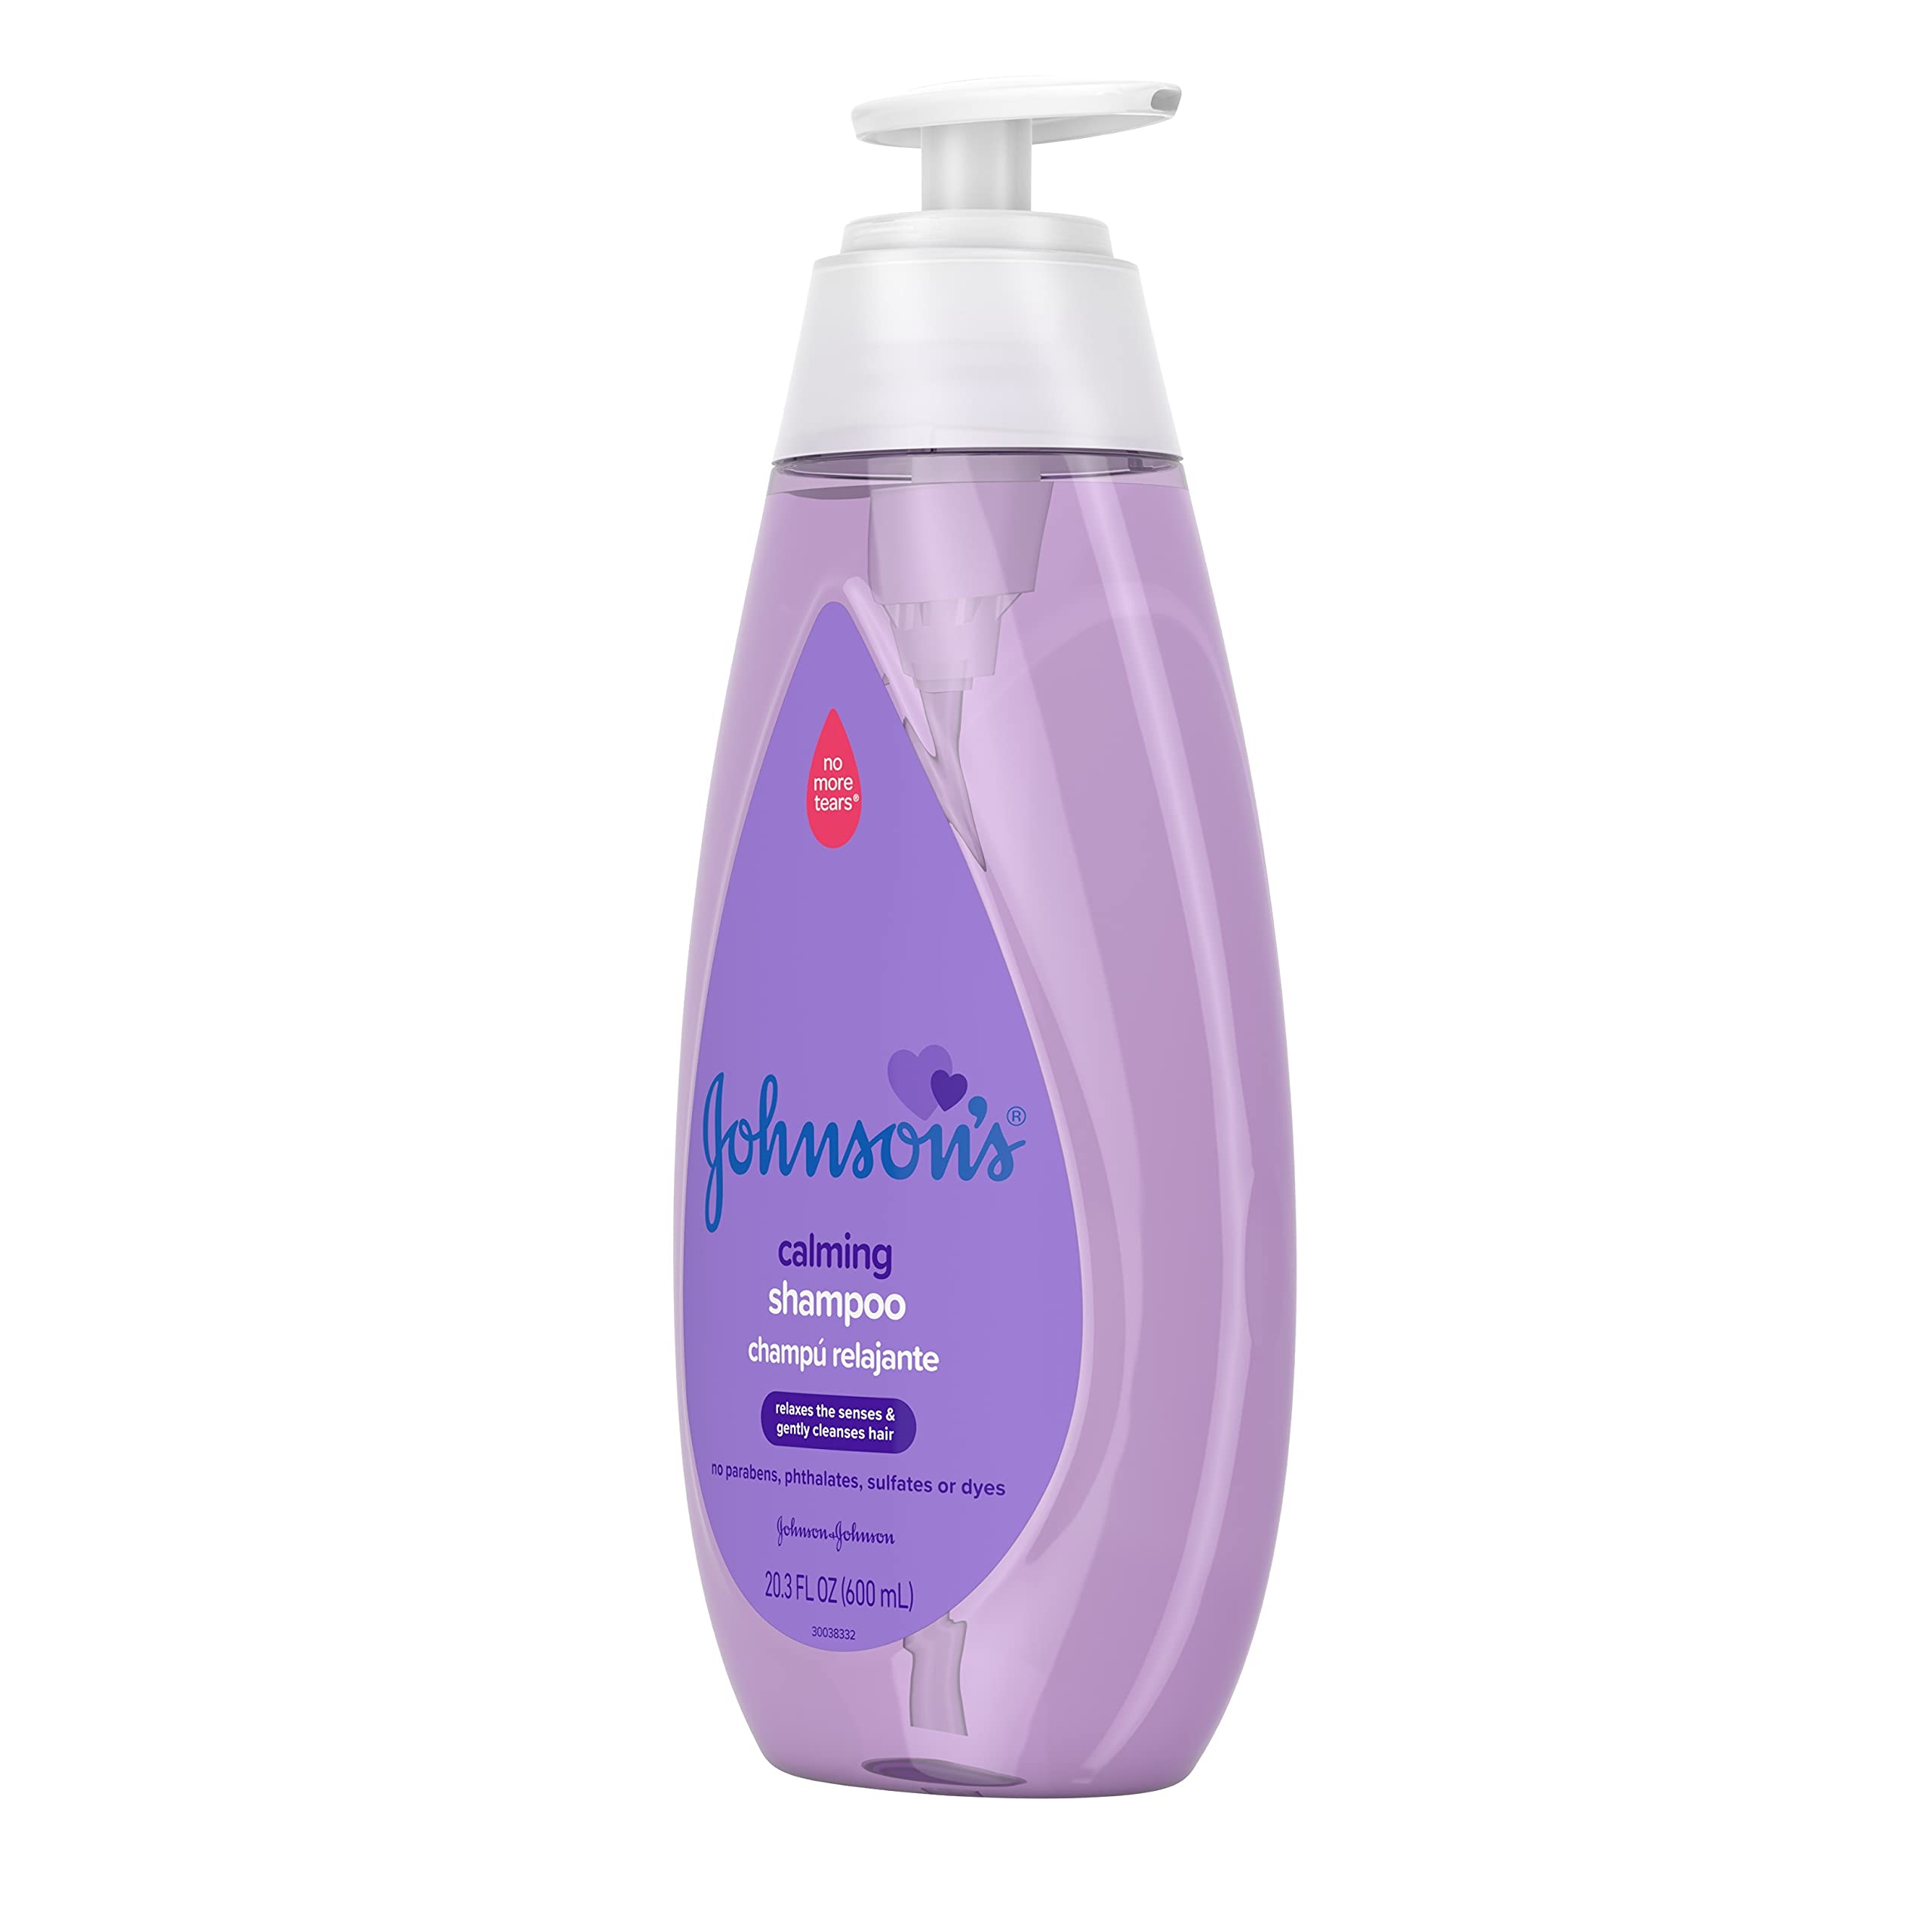 Johnson's Calming Baby Shampoo with Soothing NaturalCalm Scent, Hypoallergenic & Tear-Free Baby Hair Shampoo, Free of Parabens, Phthalates, Sulfates & Dyes, 20.3 fl. oz